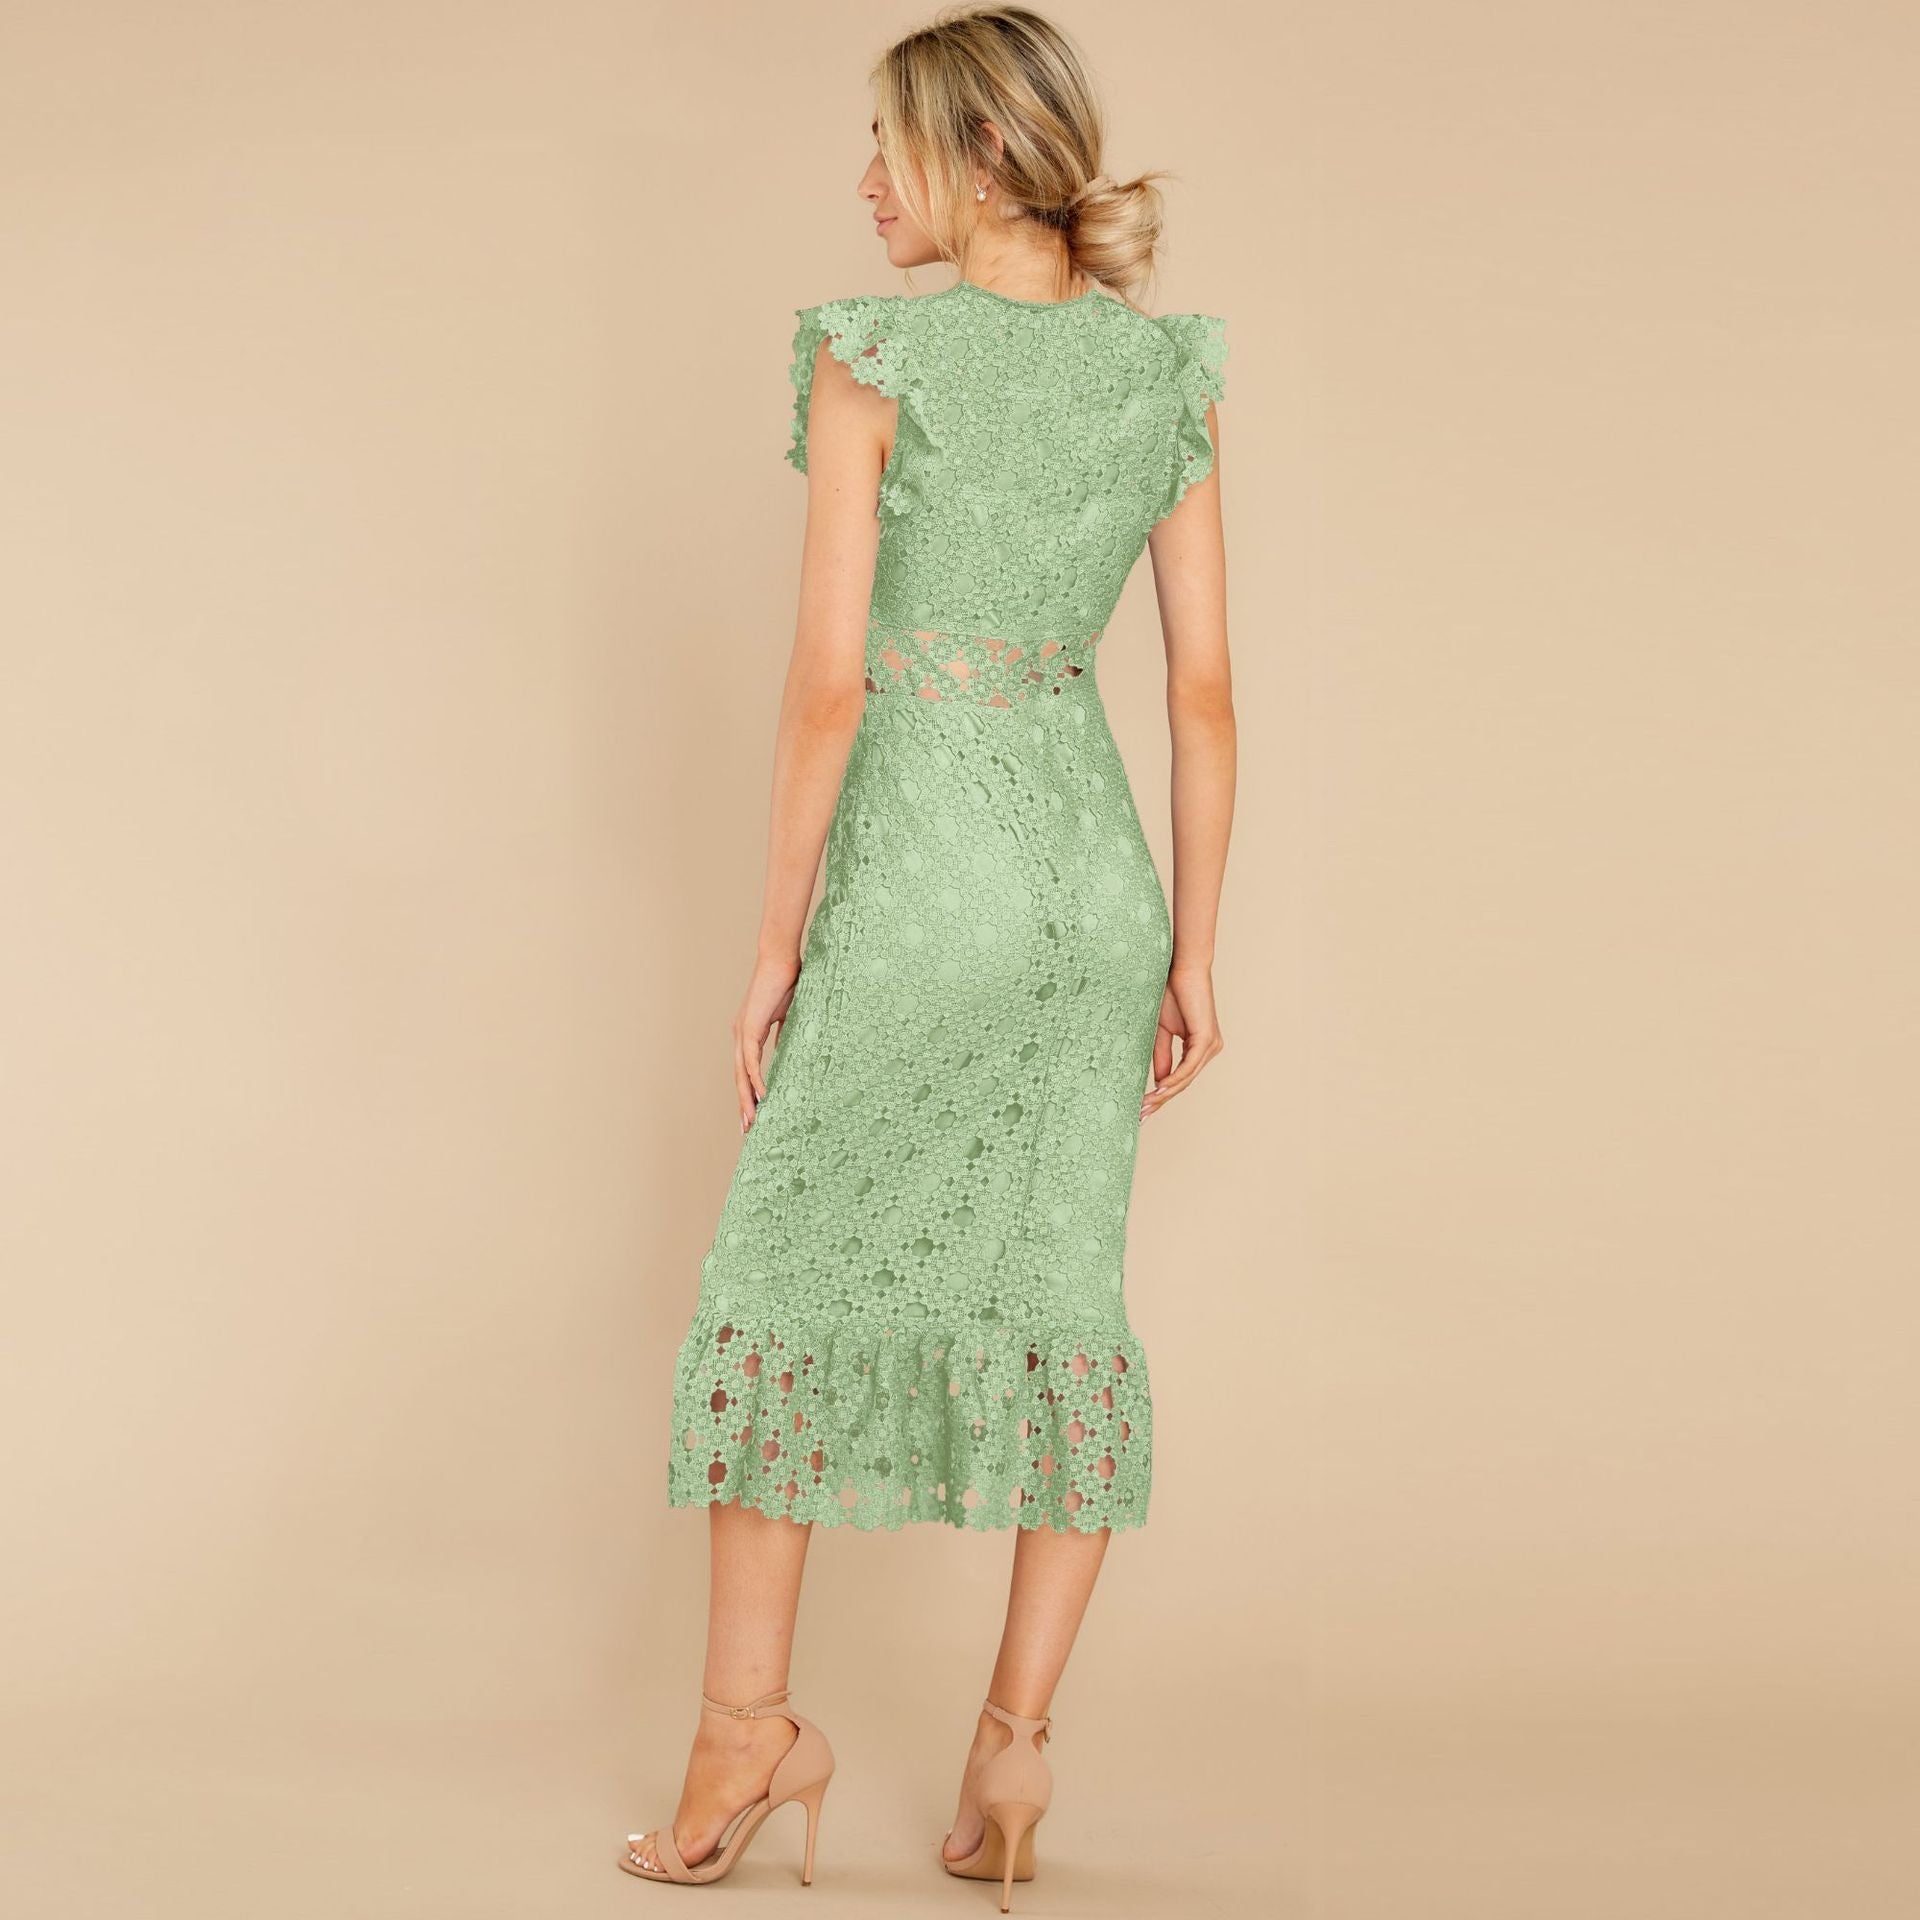 Sexy Lace Bodycon Party Dresses for Women-Dresses-Light Green-S-Free Shipping Leatheretro